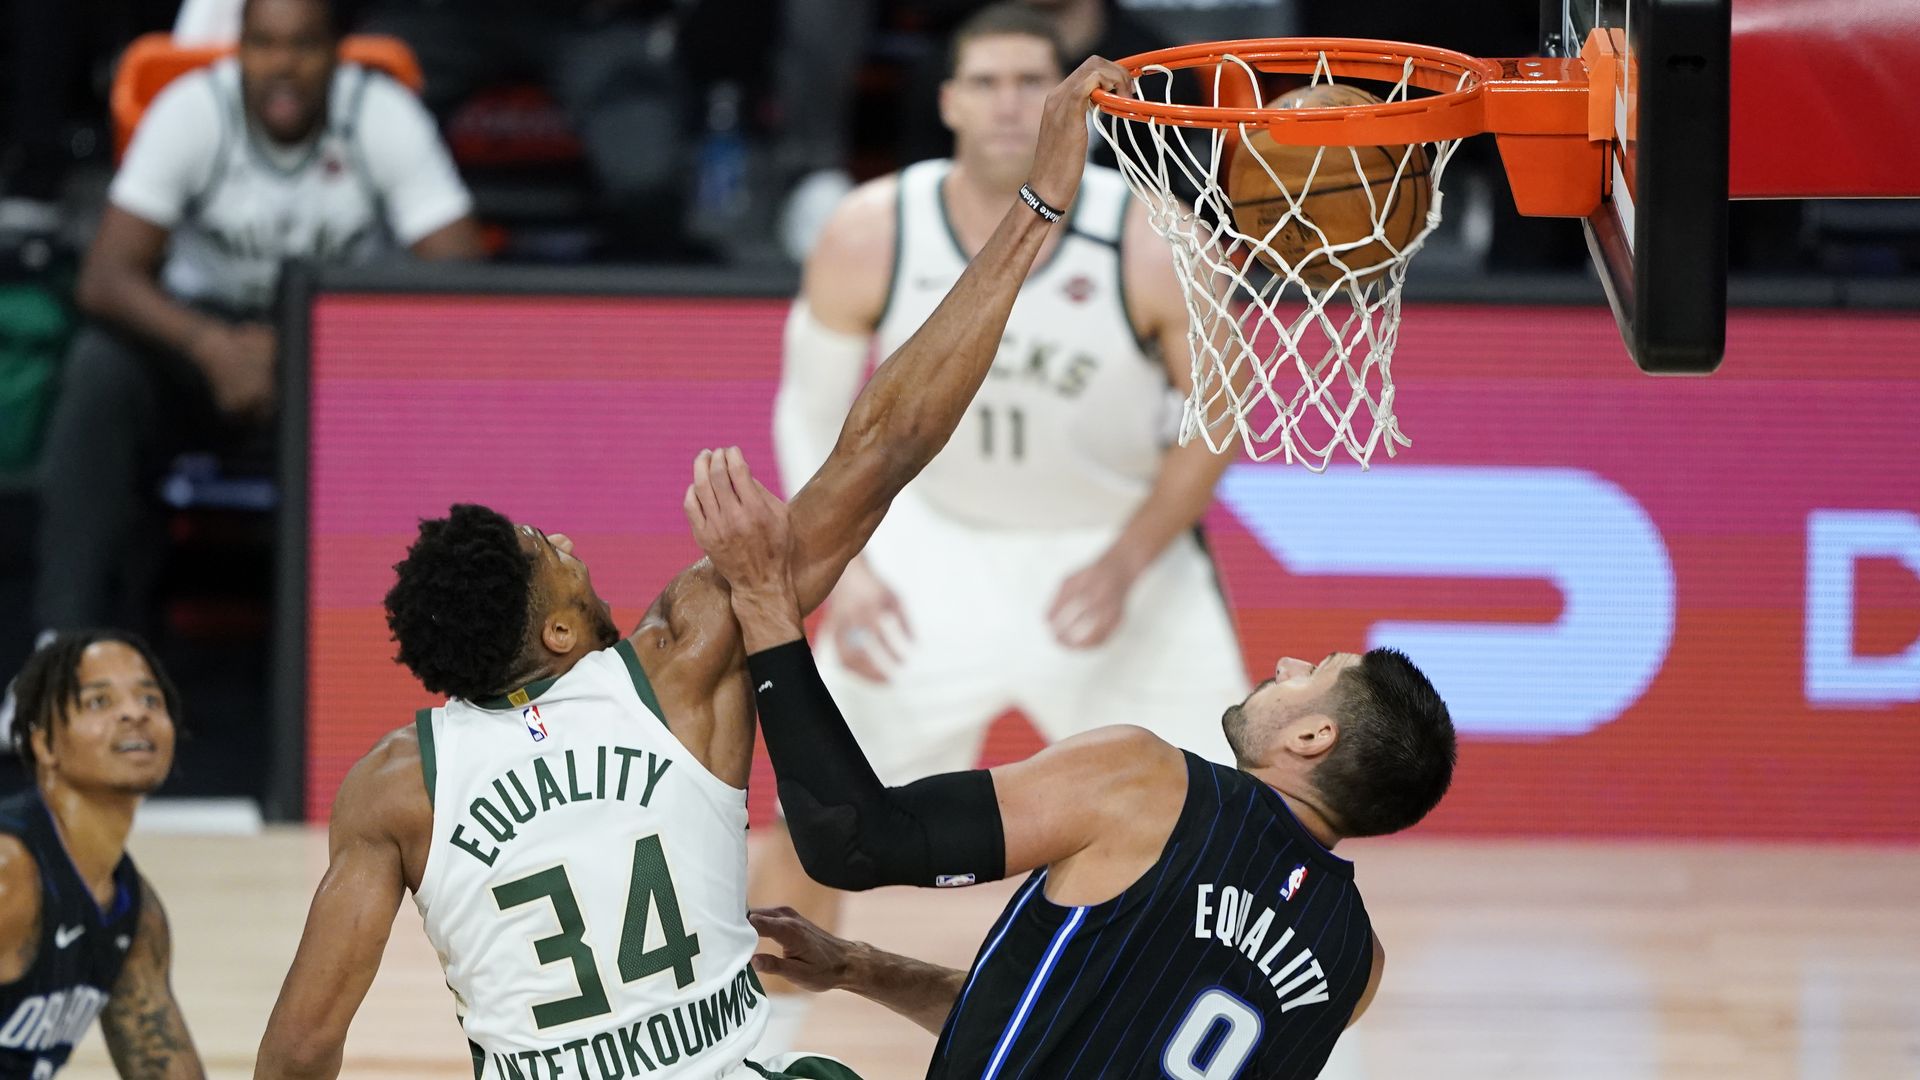 Giannis dunking